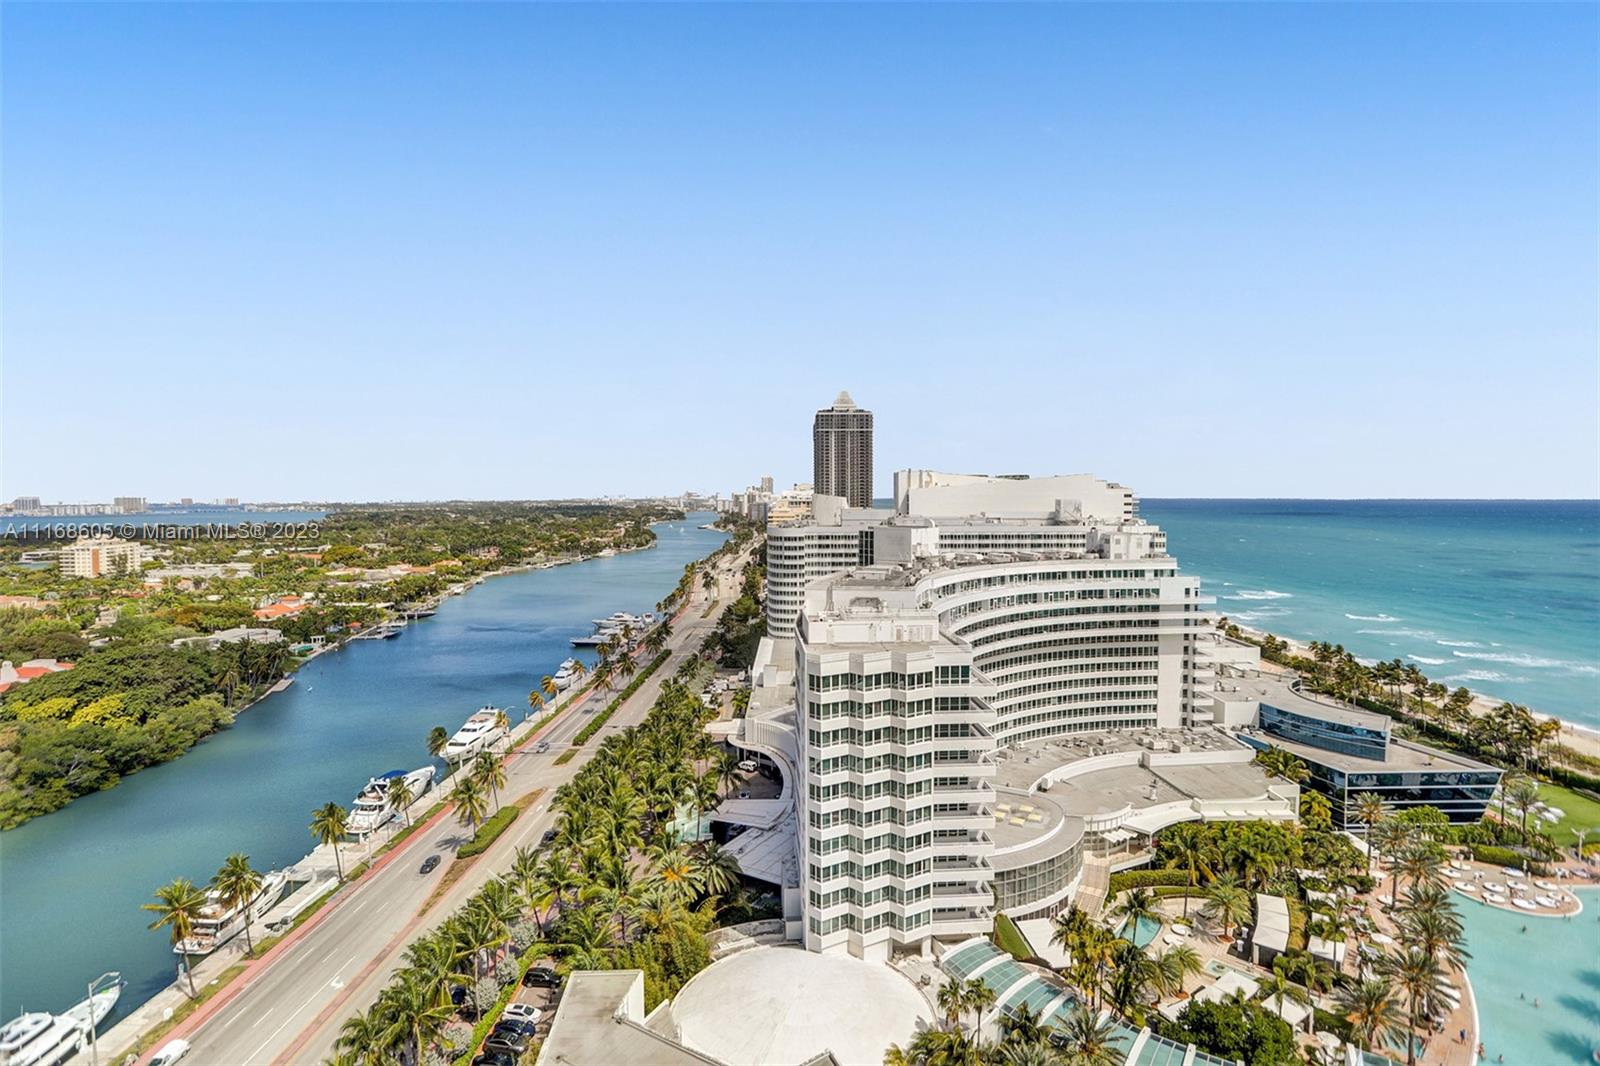 Custom designed by famous interior designer Ted Fine, this beautiful 2BD/3BA condo has spectacular unobstructed views of the ocean & bay at Fontainebleau II. All furniture, artwork and accessories included. The apartment has an open kitchen with granite countertops, three marble bathrooms with two jacuzzi tubs, washer/dryer, lots of closet space, two large balconies and floor to ceiling windows.  Enjoy full service, vacation-style living in a furnished turnkey unit. The Fontainebleau Resort offers luxury amenities on 22 oceanfront acres including award-winning restaurants, LIV night club, Lapis spa & state-of-the-art fitness center. Maintenance includes : AC, local calls, electricity, valet + daily free breakfast in owners lounge.